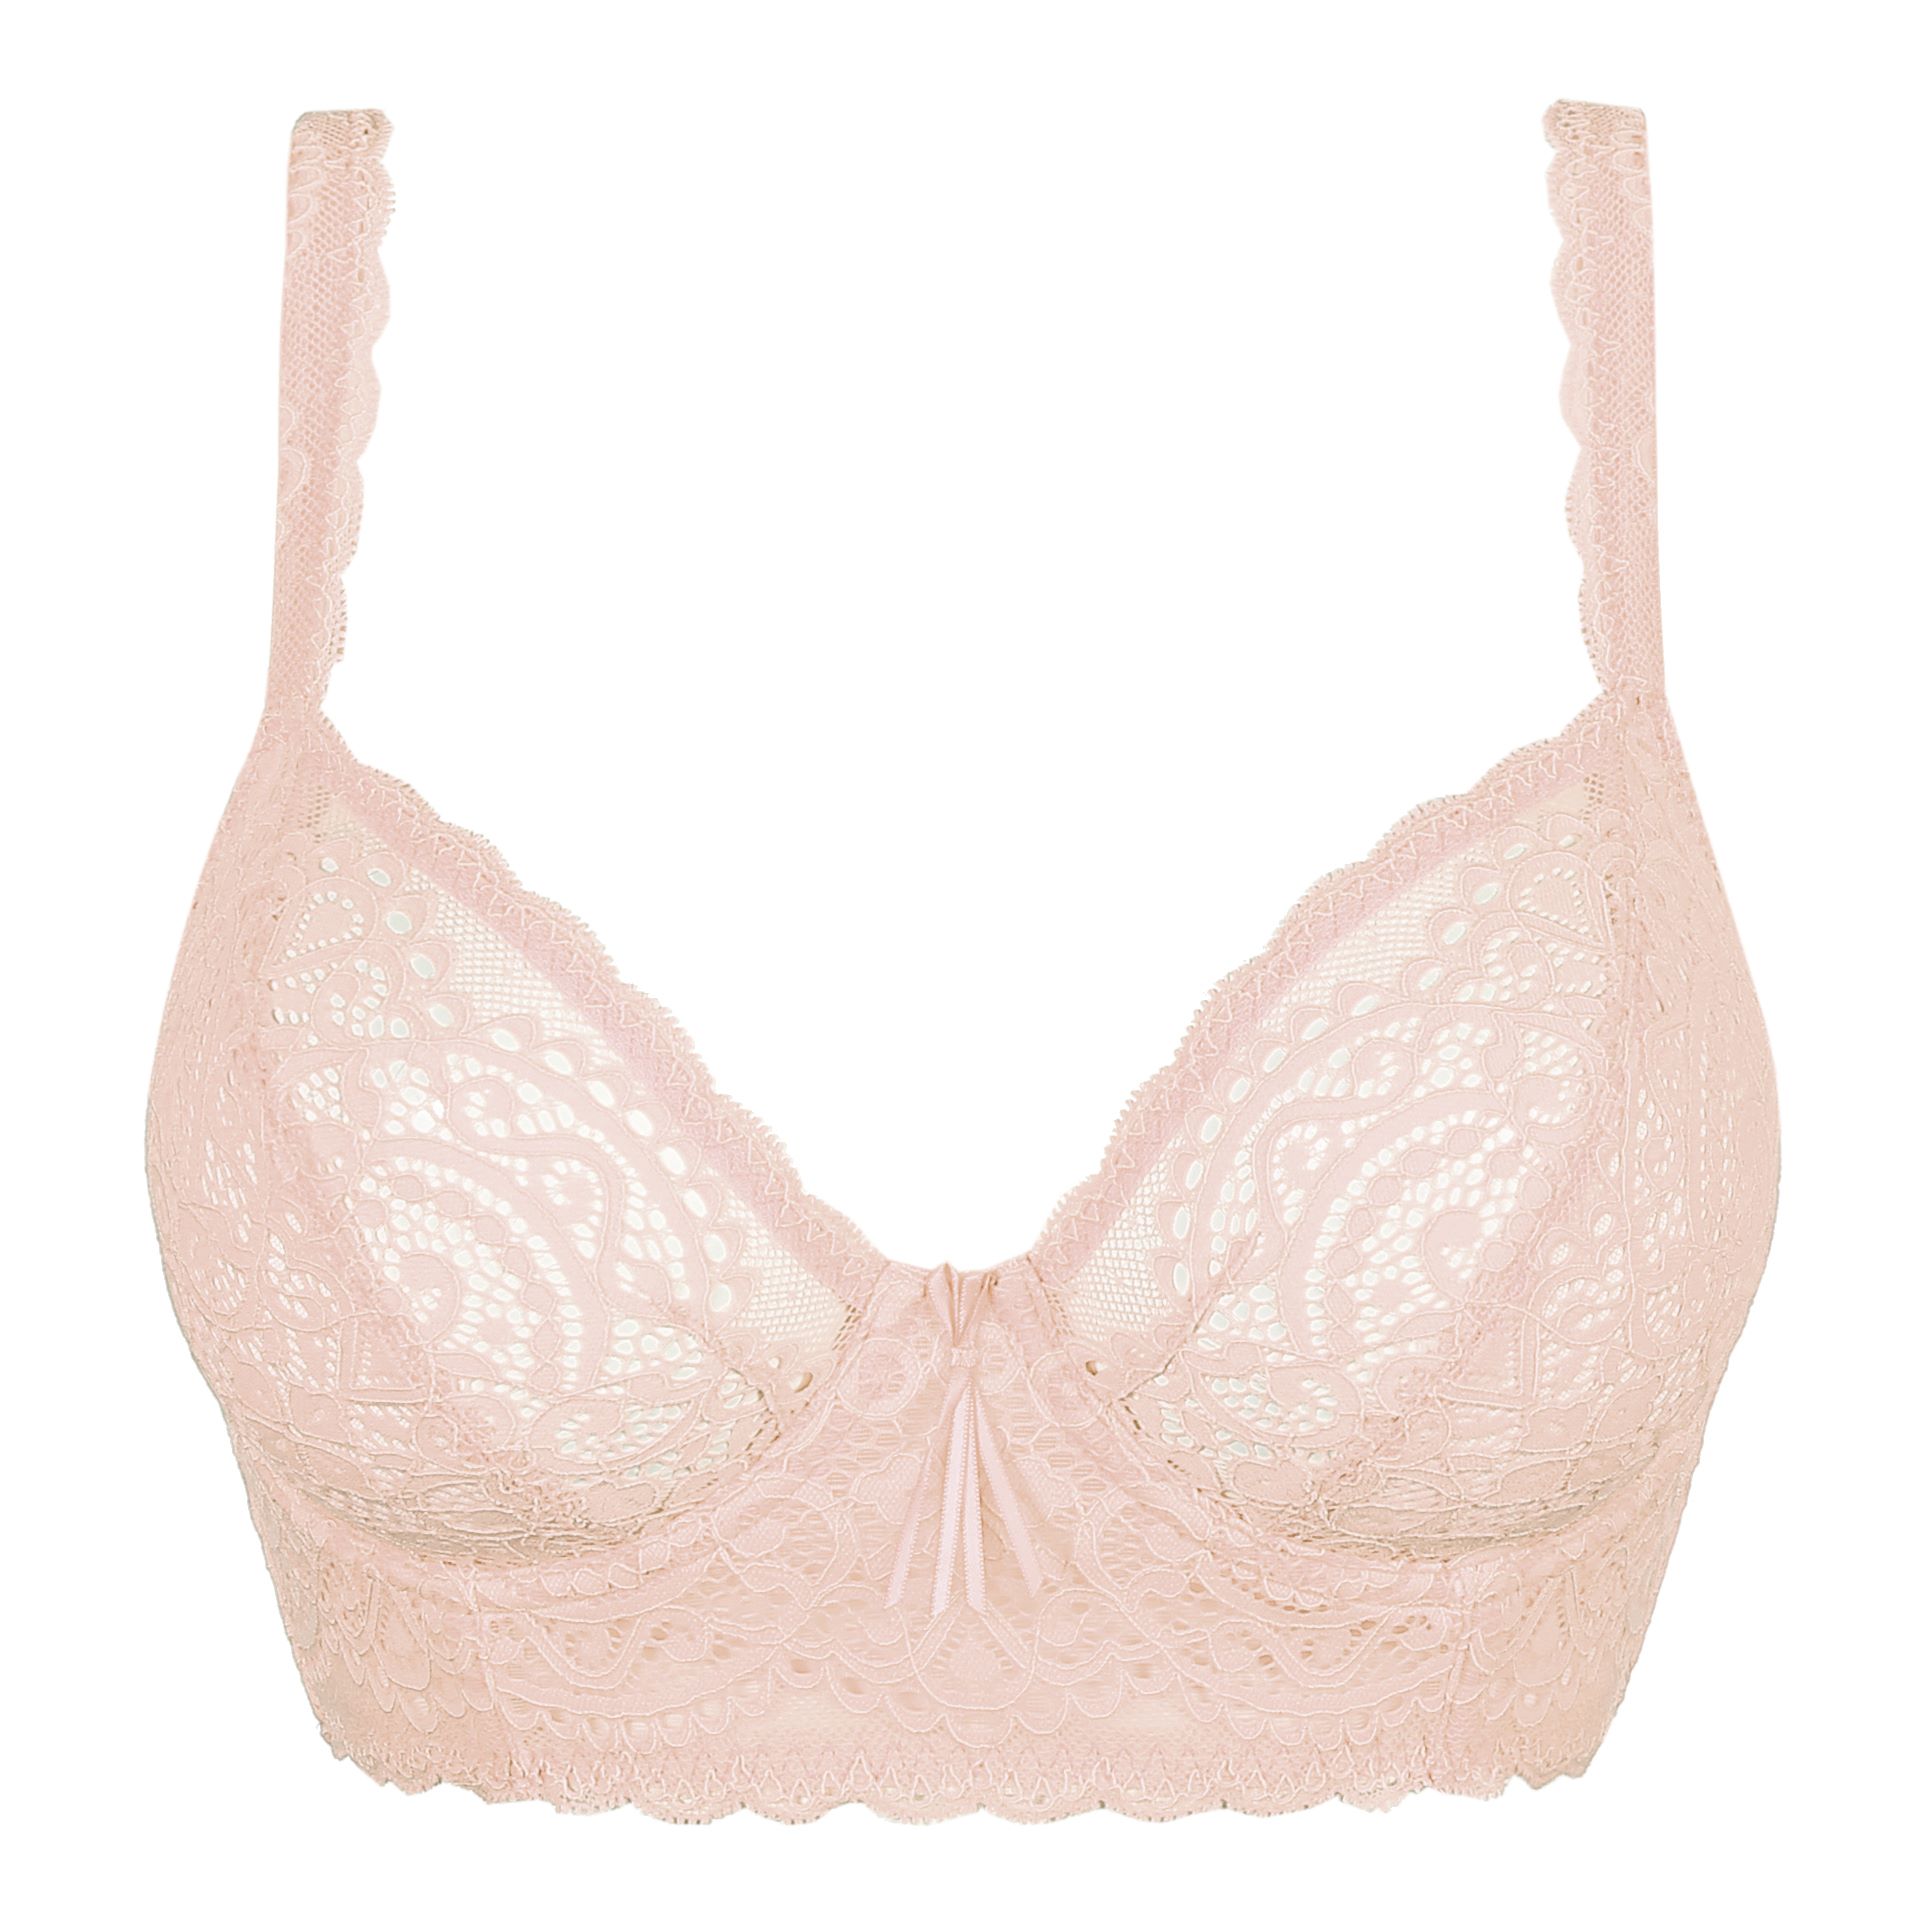 Thong Verao Prima Donna Twist couleur L.A. Pink tailles 36 38 40